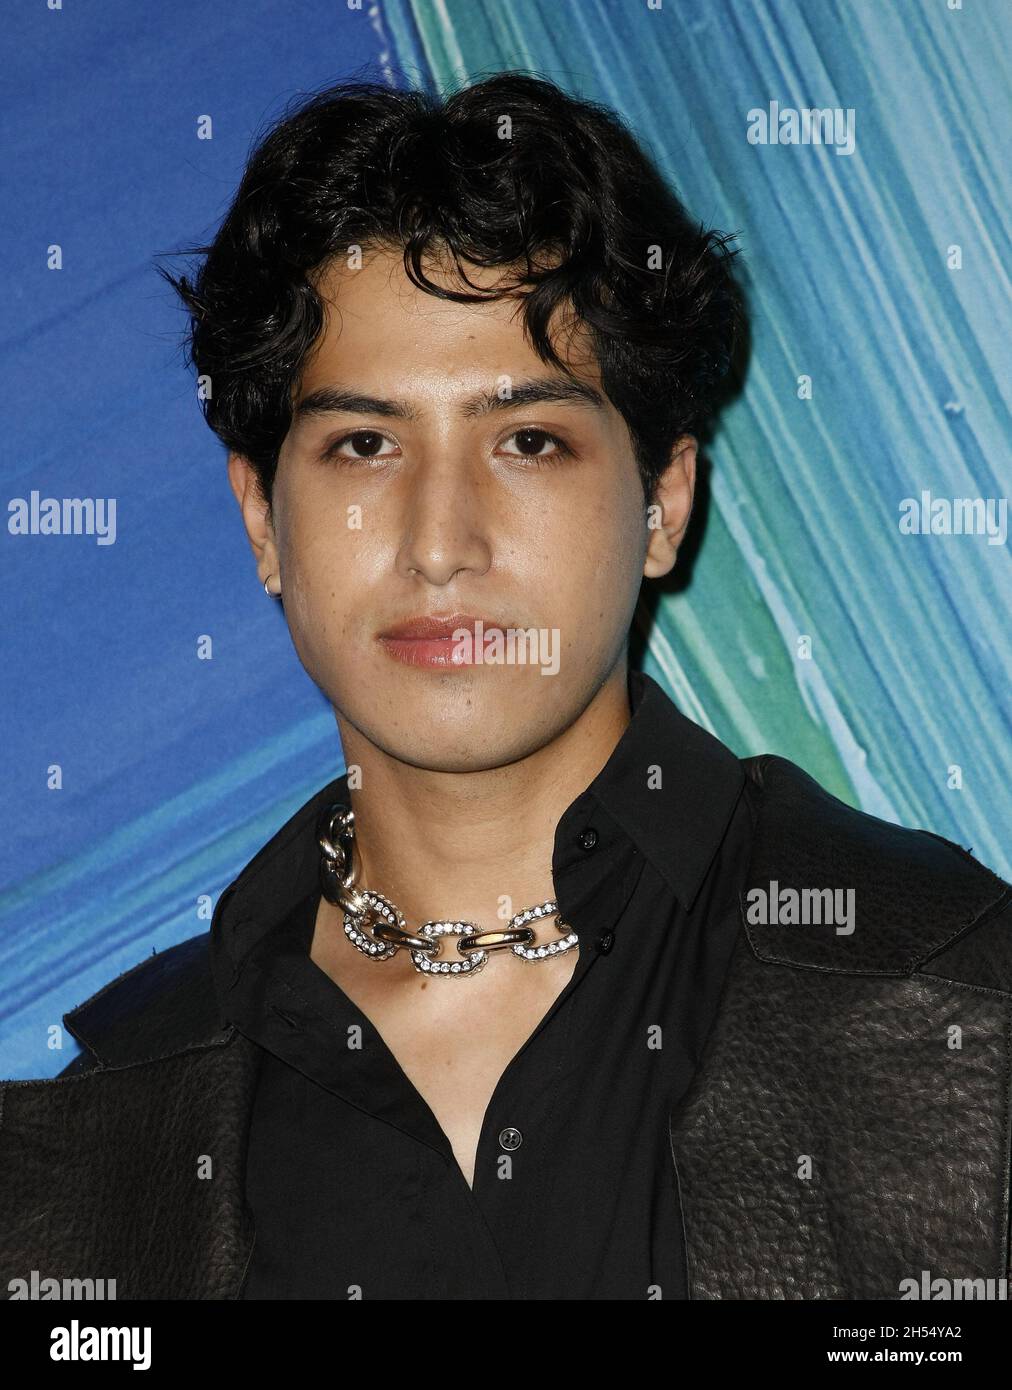 WEST HOLLYWOOD, CALIFORNIA - NOVEMBER 04: Kemio attends the amfAR Gala Los Angeles 2021 honoring TikTok and Jeremy Scott at Pacific Design Center on November 04, 2021 in West Hollywood, California. Photo: CraSH/imageSPACE/MediaPunch Stock Photo